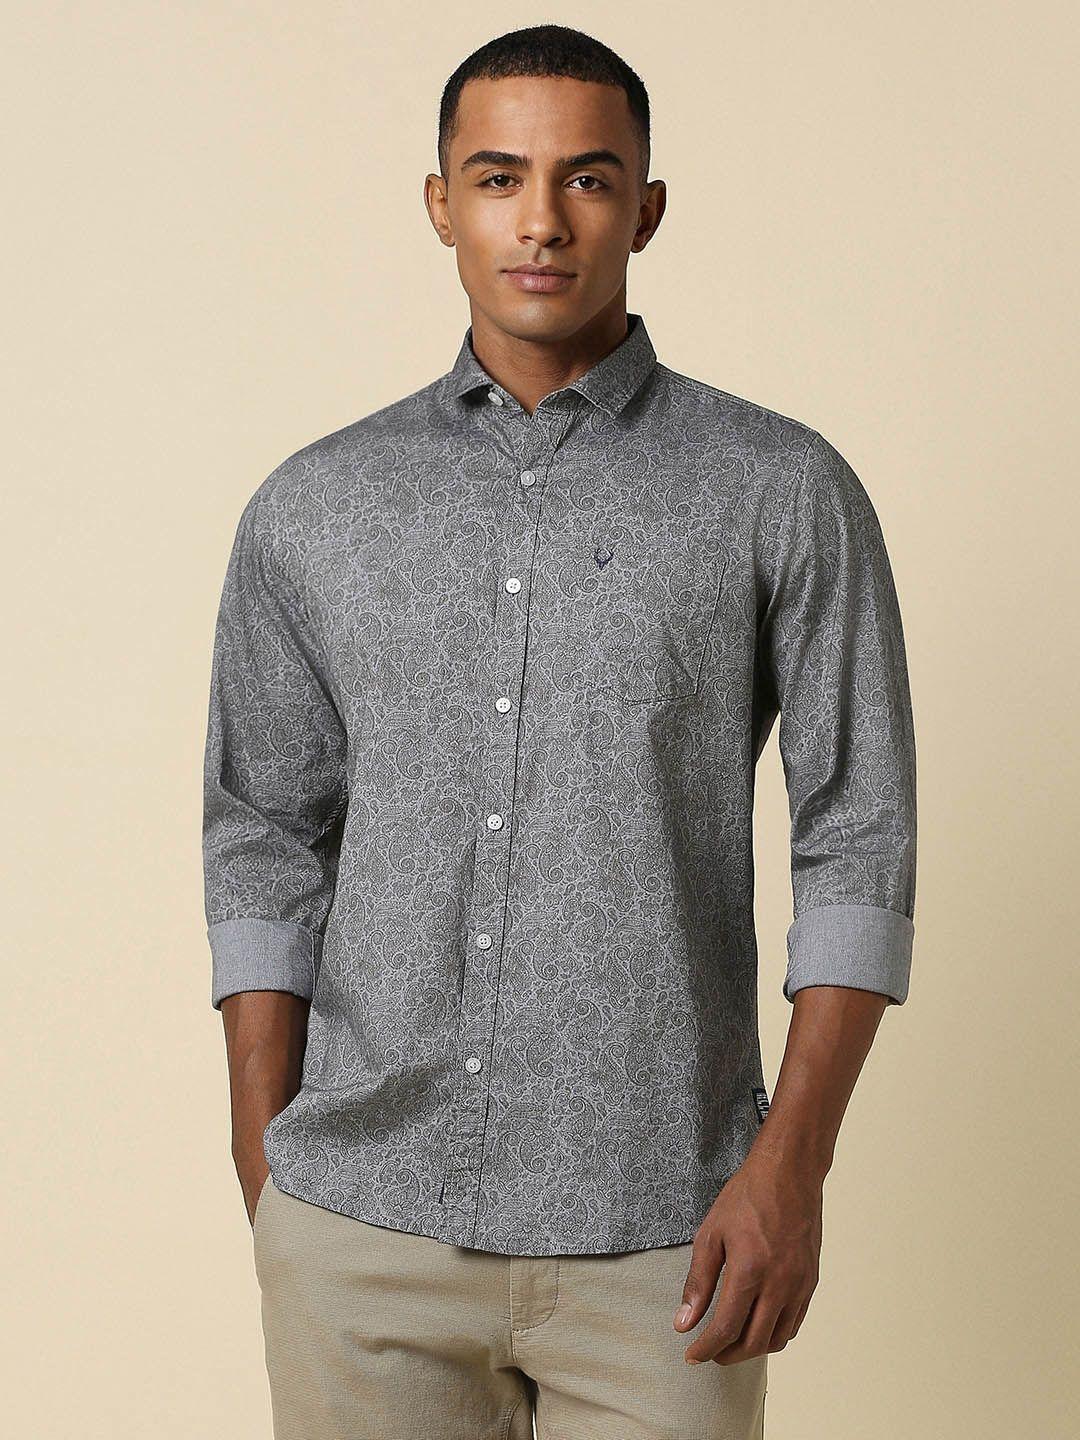 allen solly spread ethnic motifs printed casual pure cotton shirt